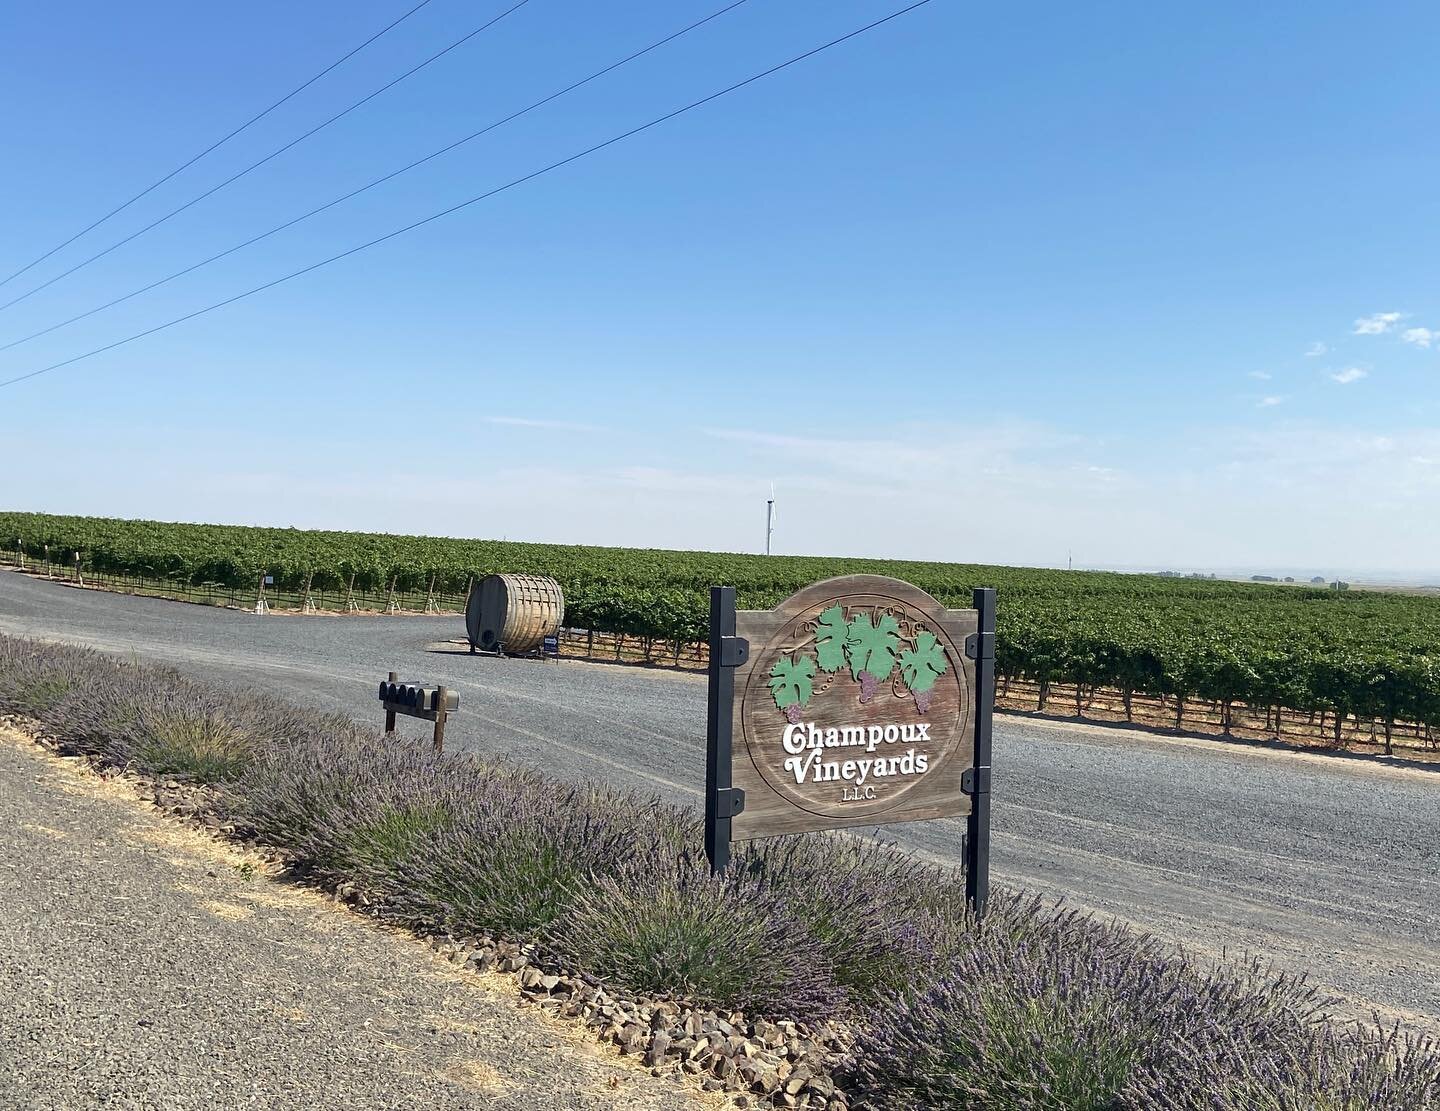 Just down the street from our new Merlot vineyard is Champoux Vineyards, considered one of the West Coast&rsquo;s &ldquo;grand cru&rdquo; (a site that consistently produces great wines) sites. This vineyard has produced seven 100 point wines since 20